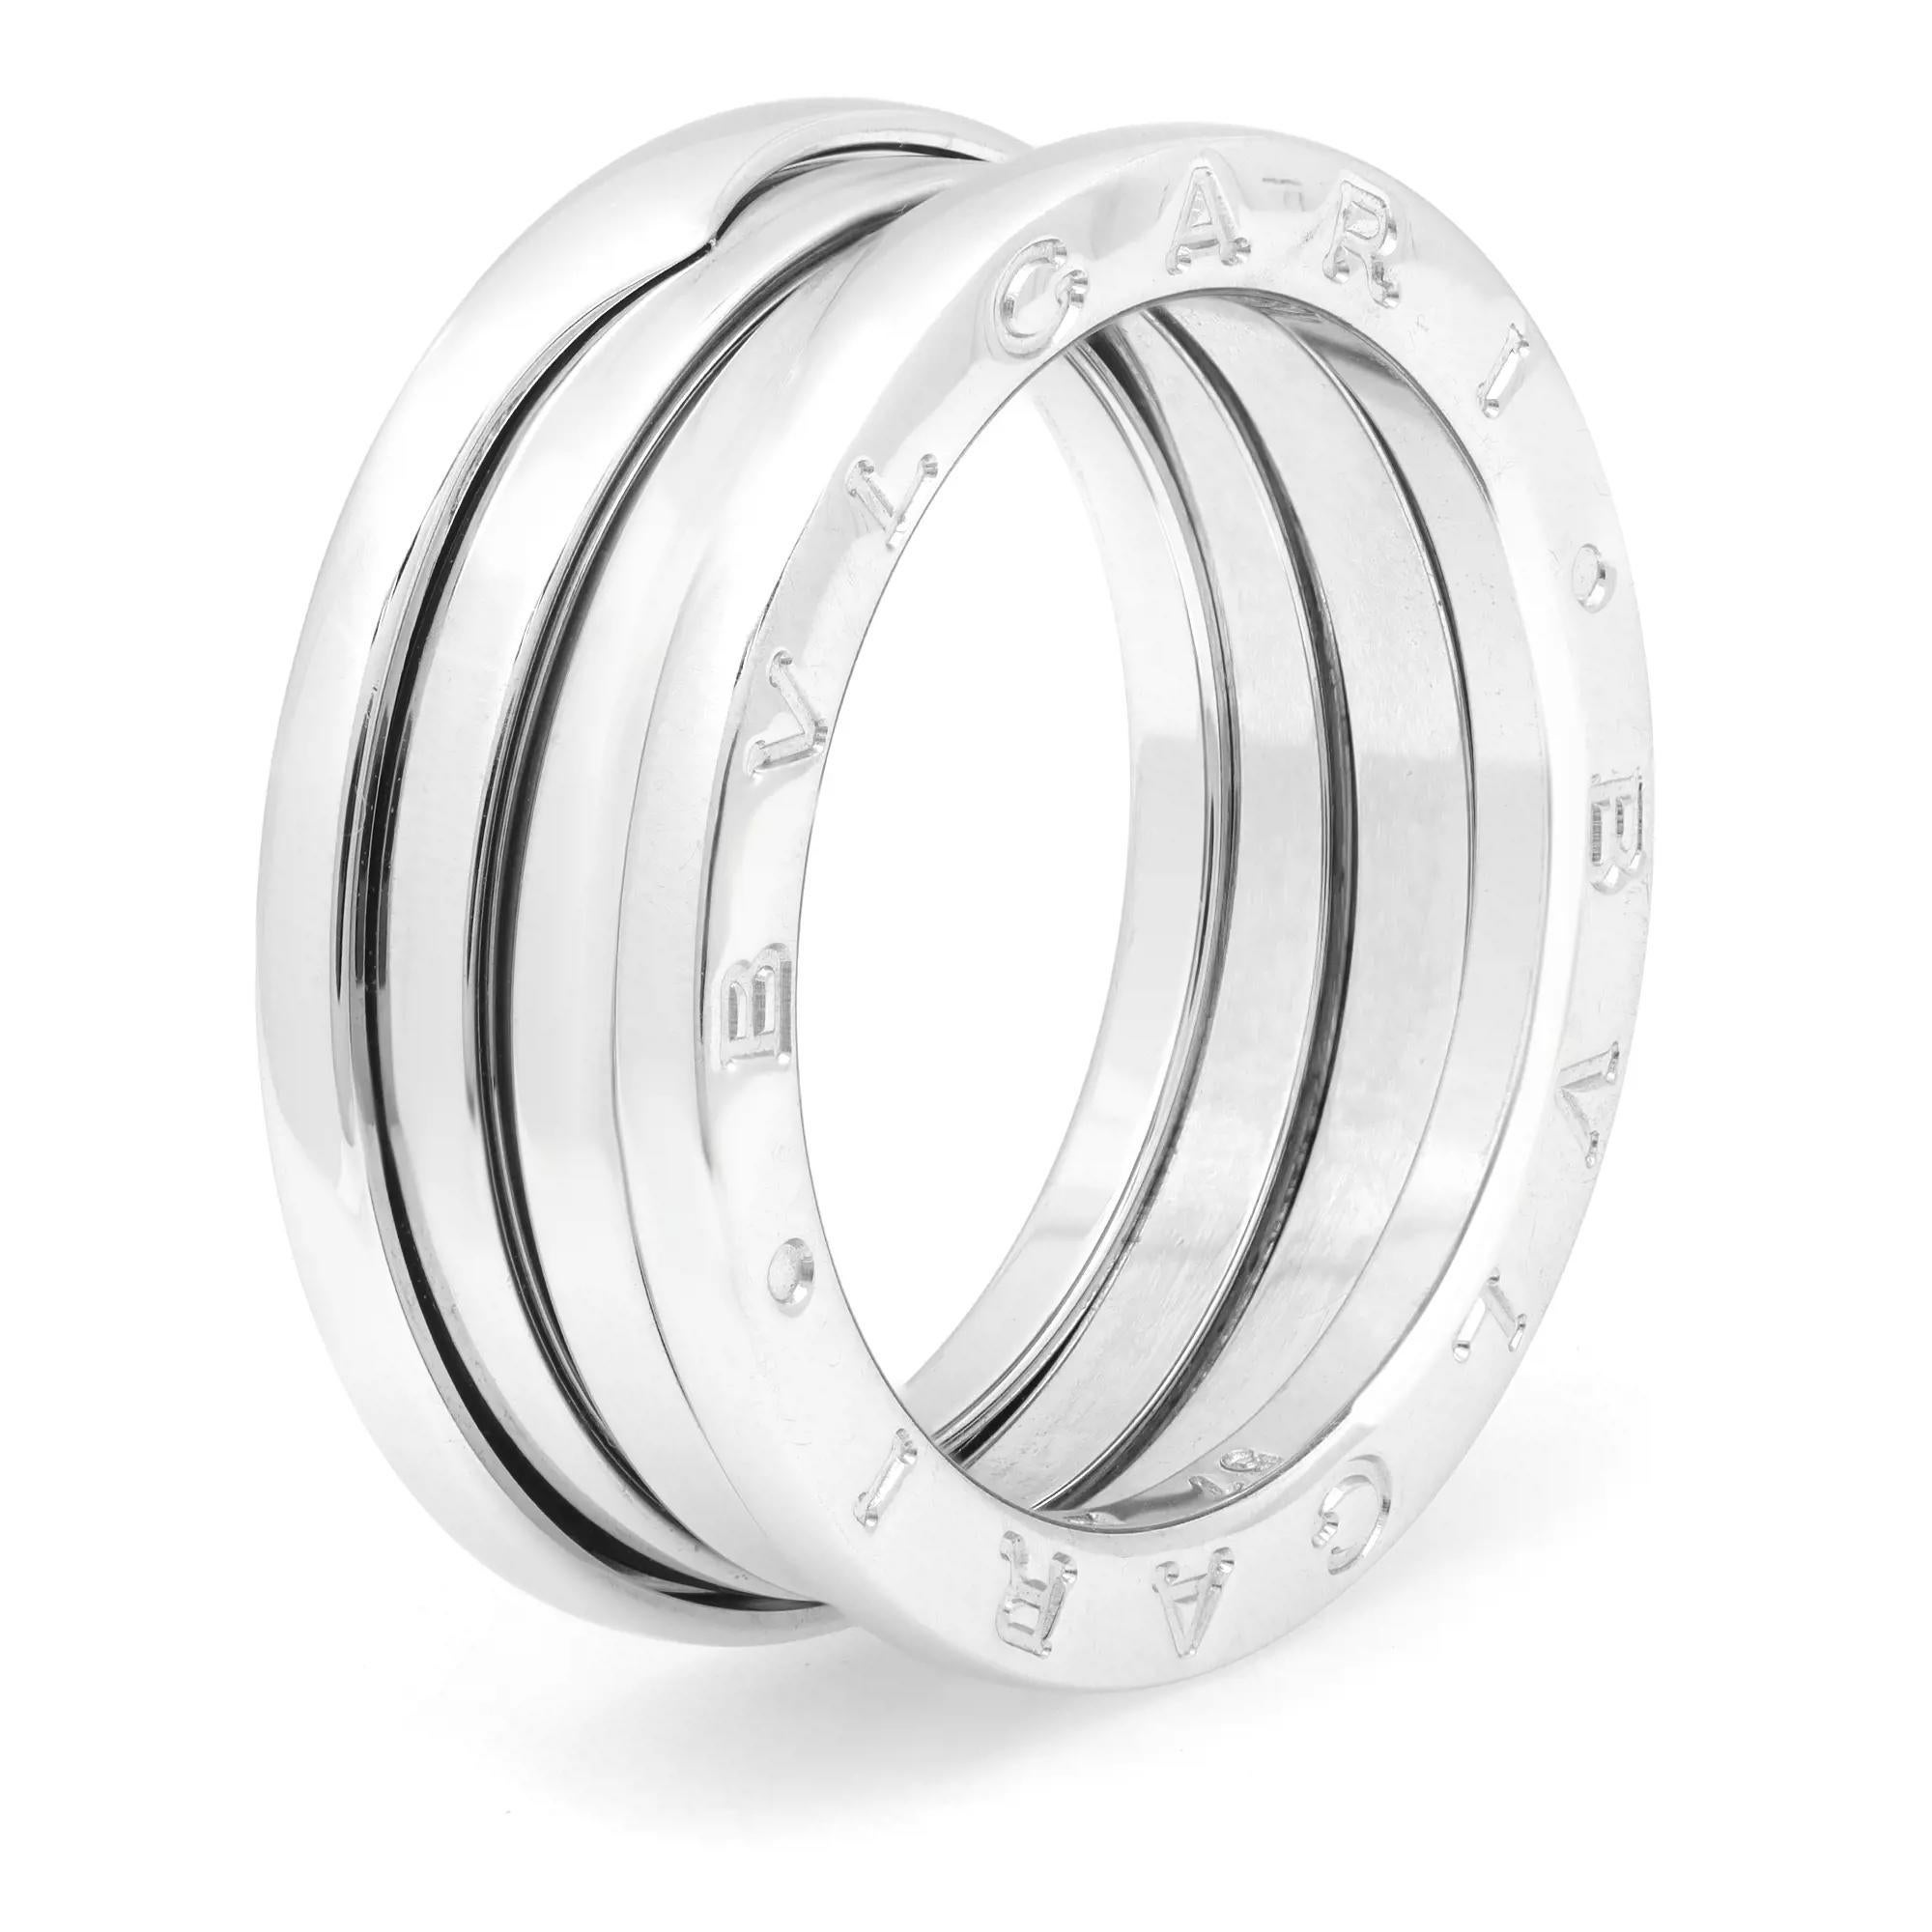 The B.Zero1 ring is a signature piece from the legendary jewelry design house Bvlgari. Crafted in fine 18K White Gold. It features a clean modern three spiral band ring engraved with the BVLGARI logo on both sides. This ring makes a great timeless